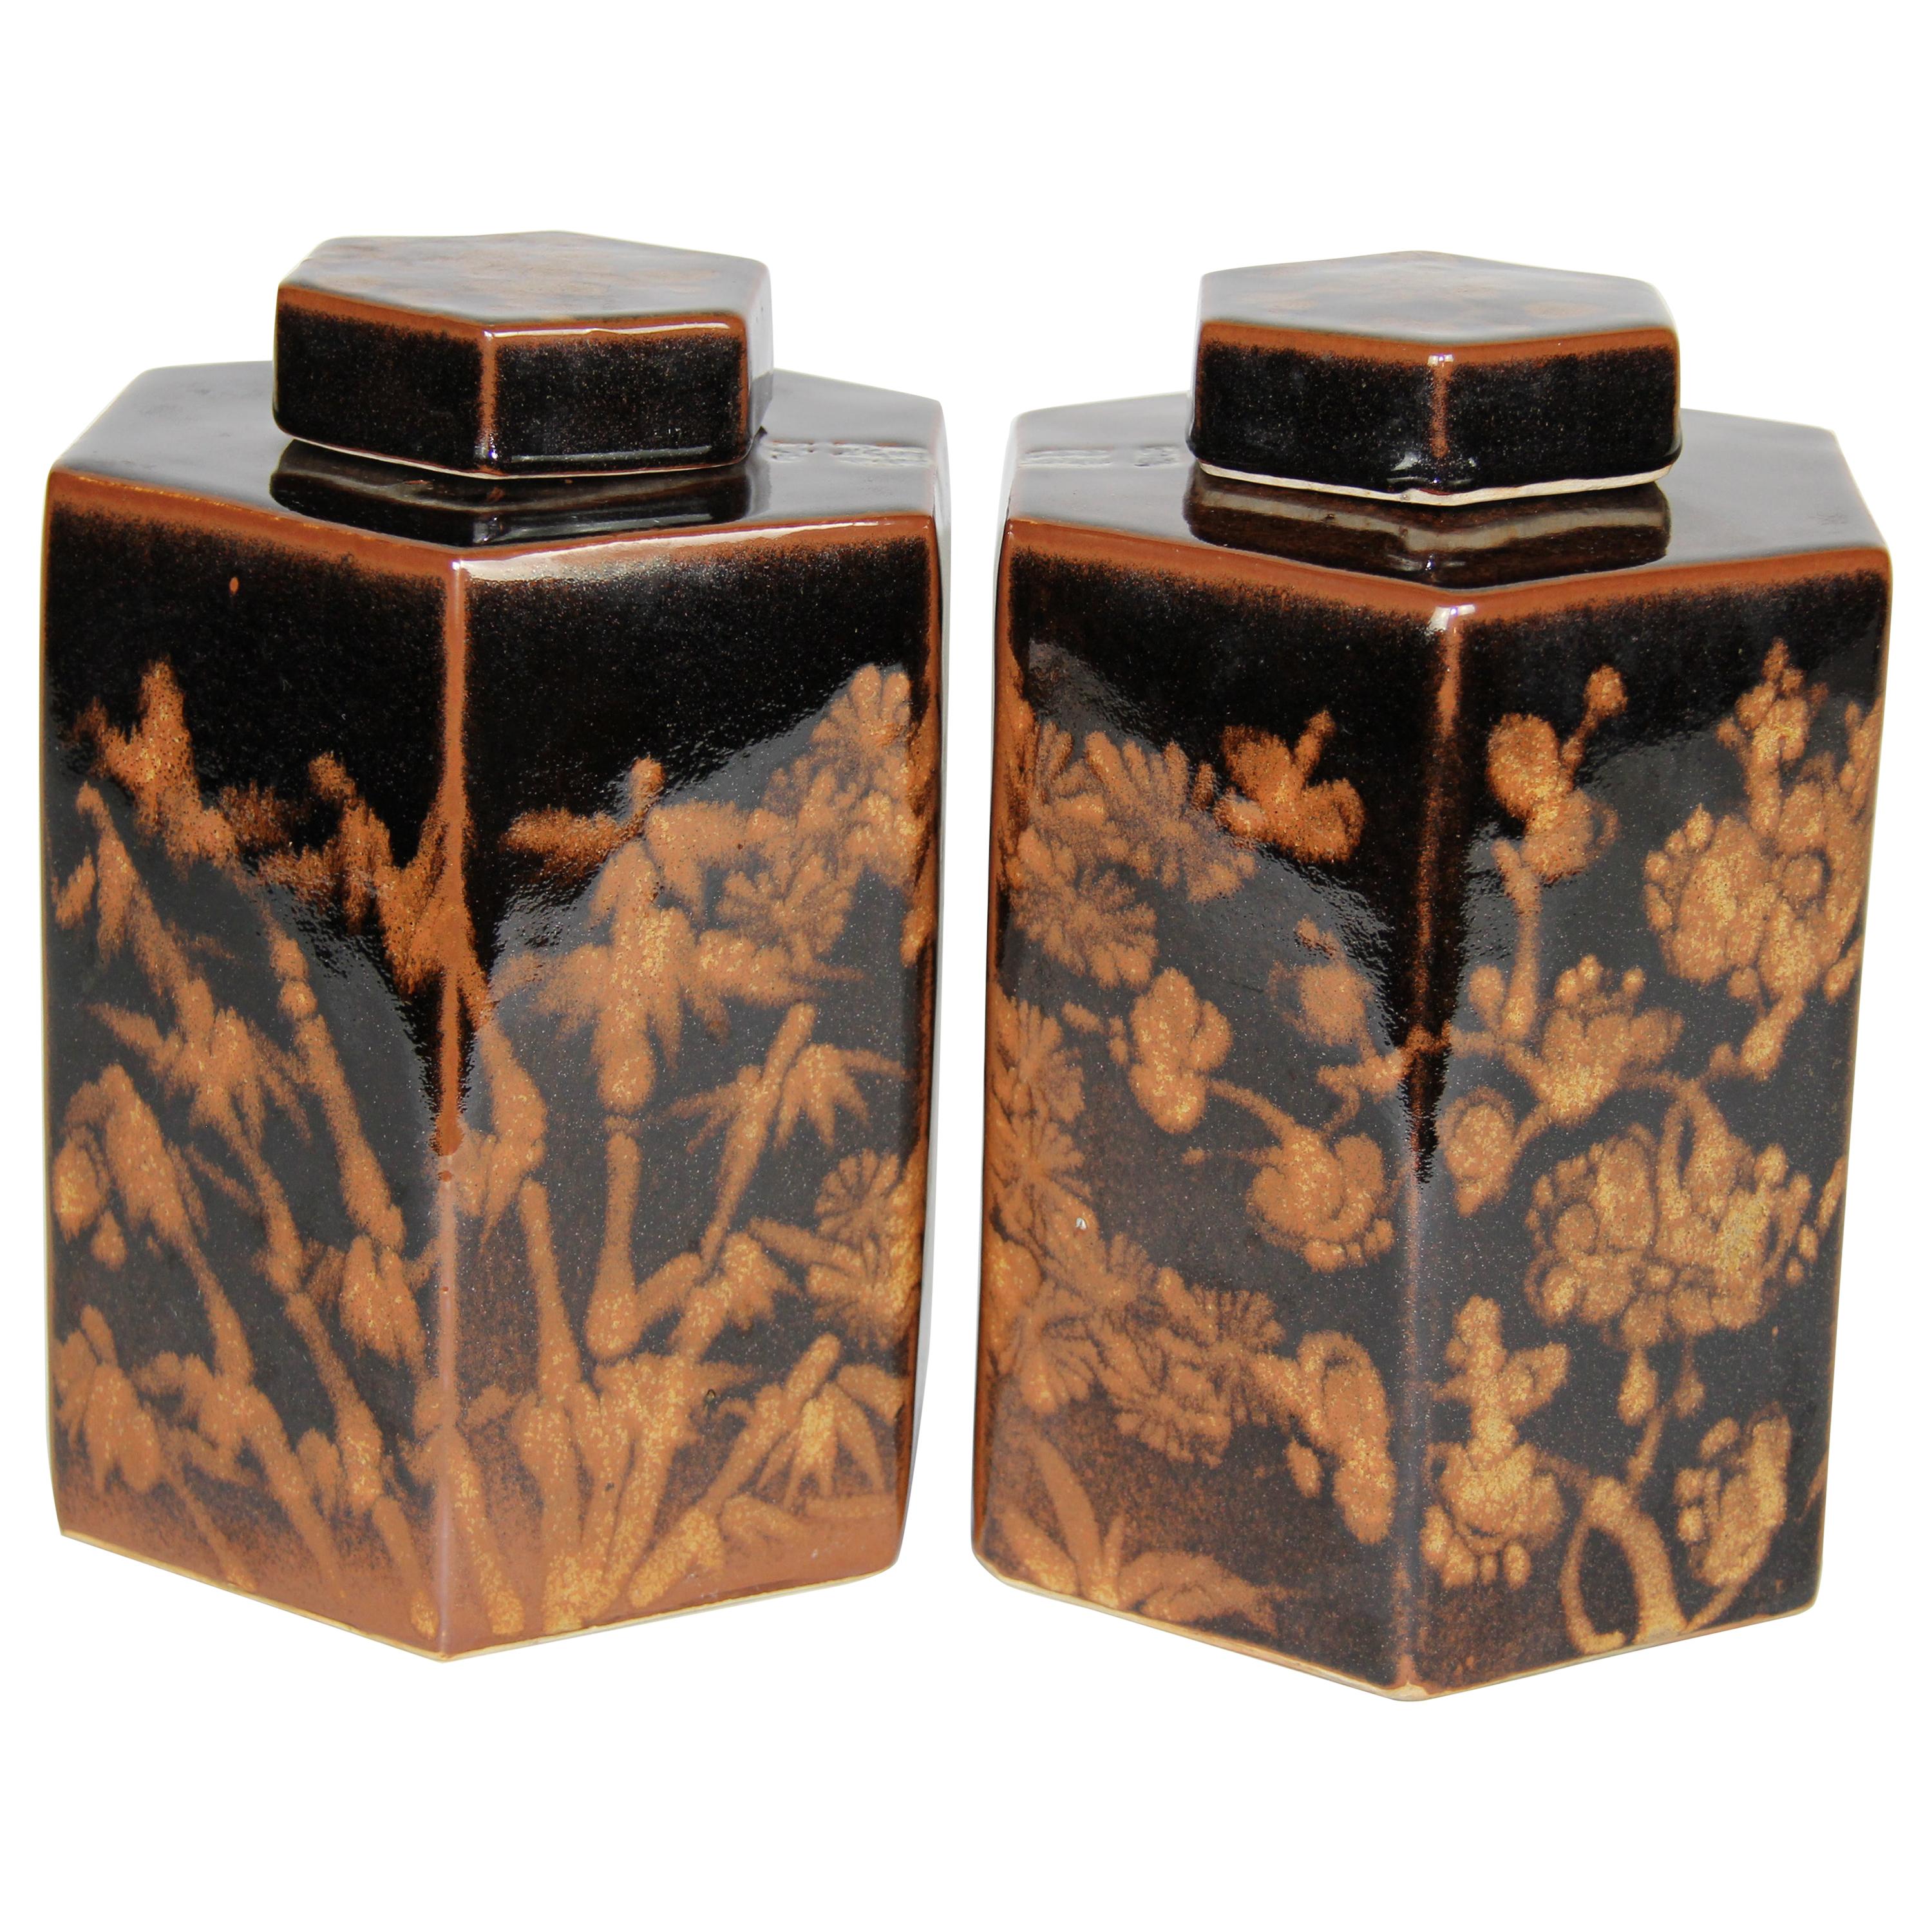 Pair of Hand Painted Porcelain Tea Caddies with Floral and Bamboo Motifs